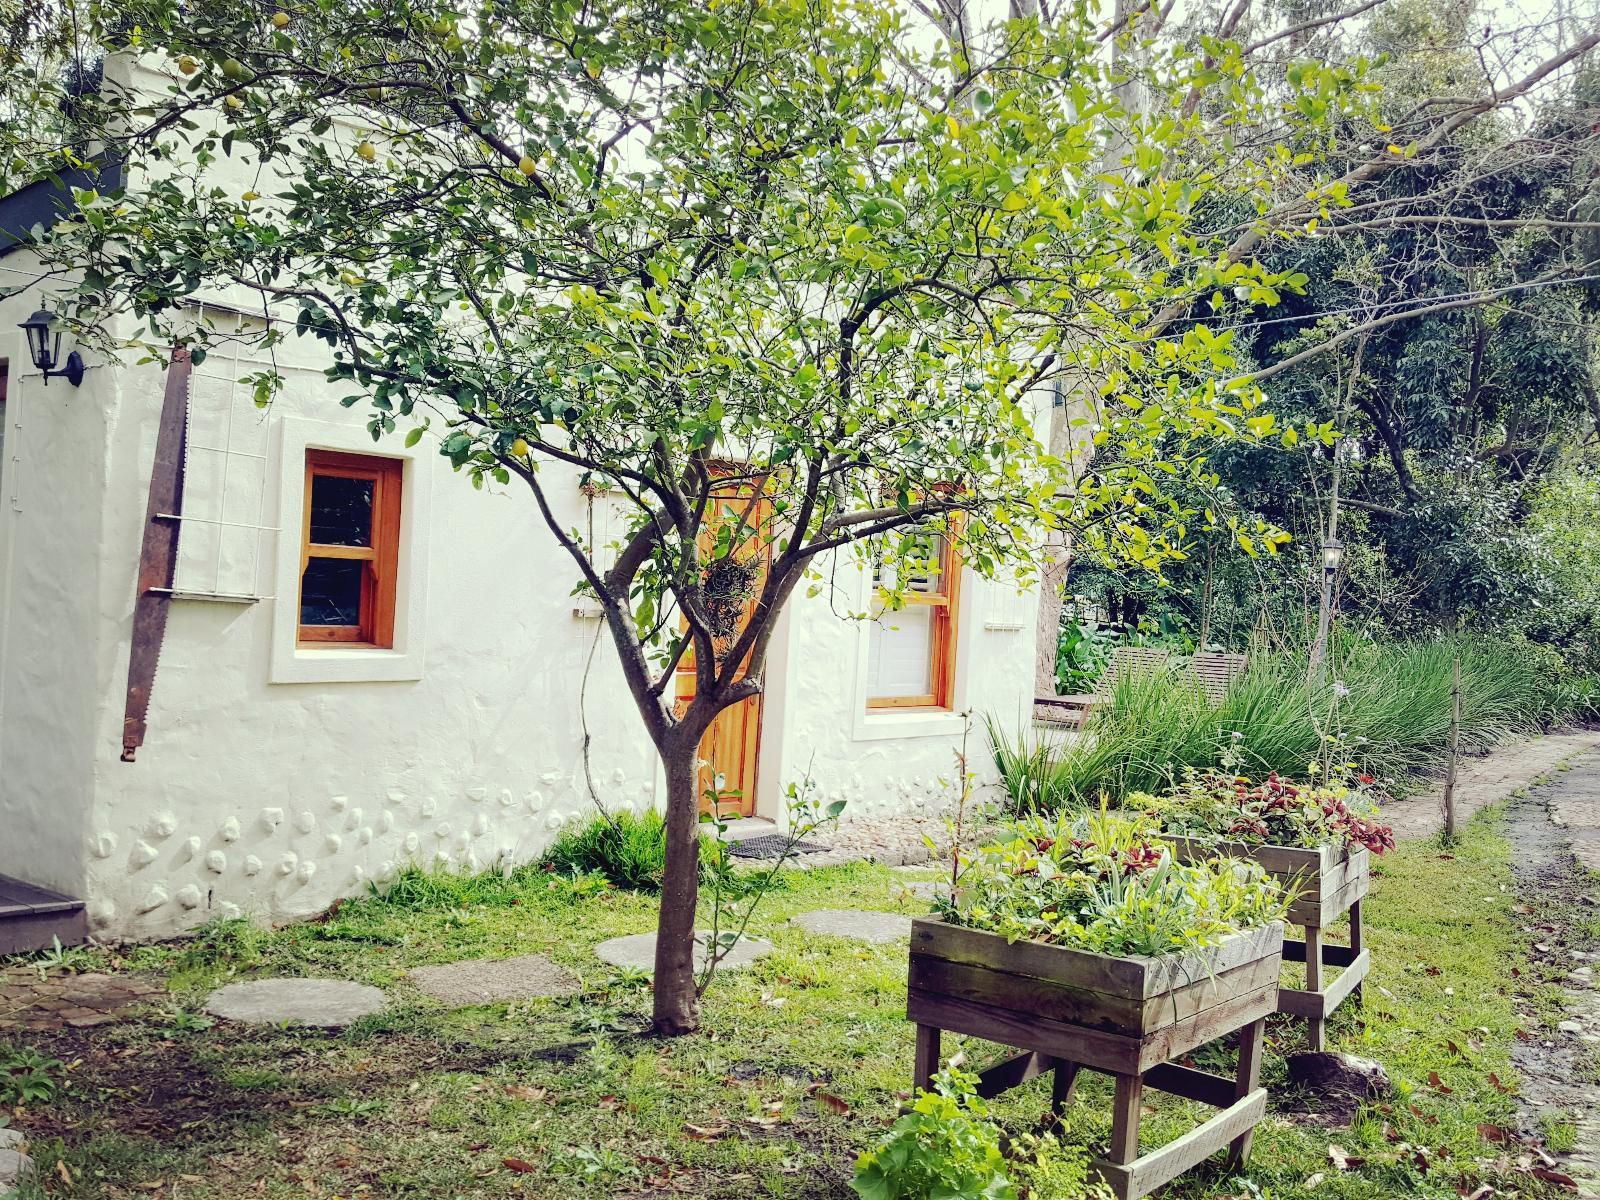 High Hopes Retreats And Guest House Greyton Western Cape South Africa House, Building, Architecture, Plant, Nature, Tree, Wood, Garden